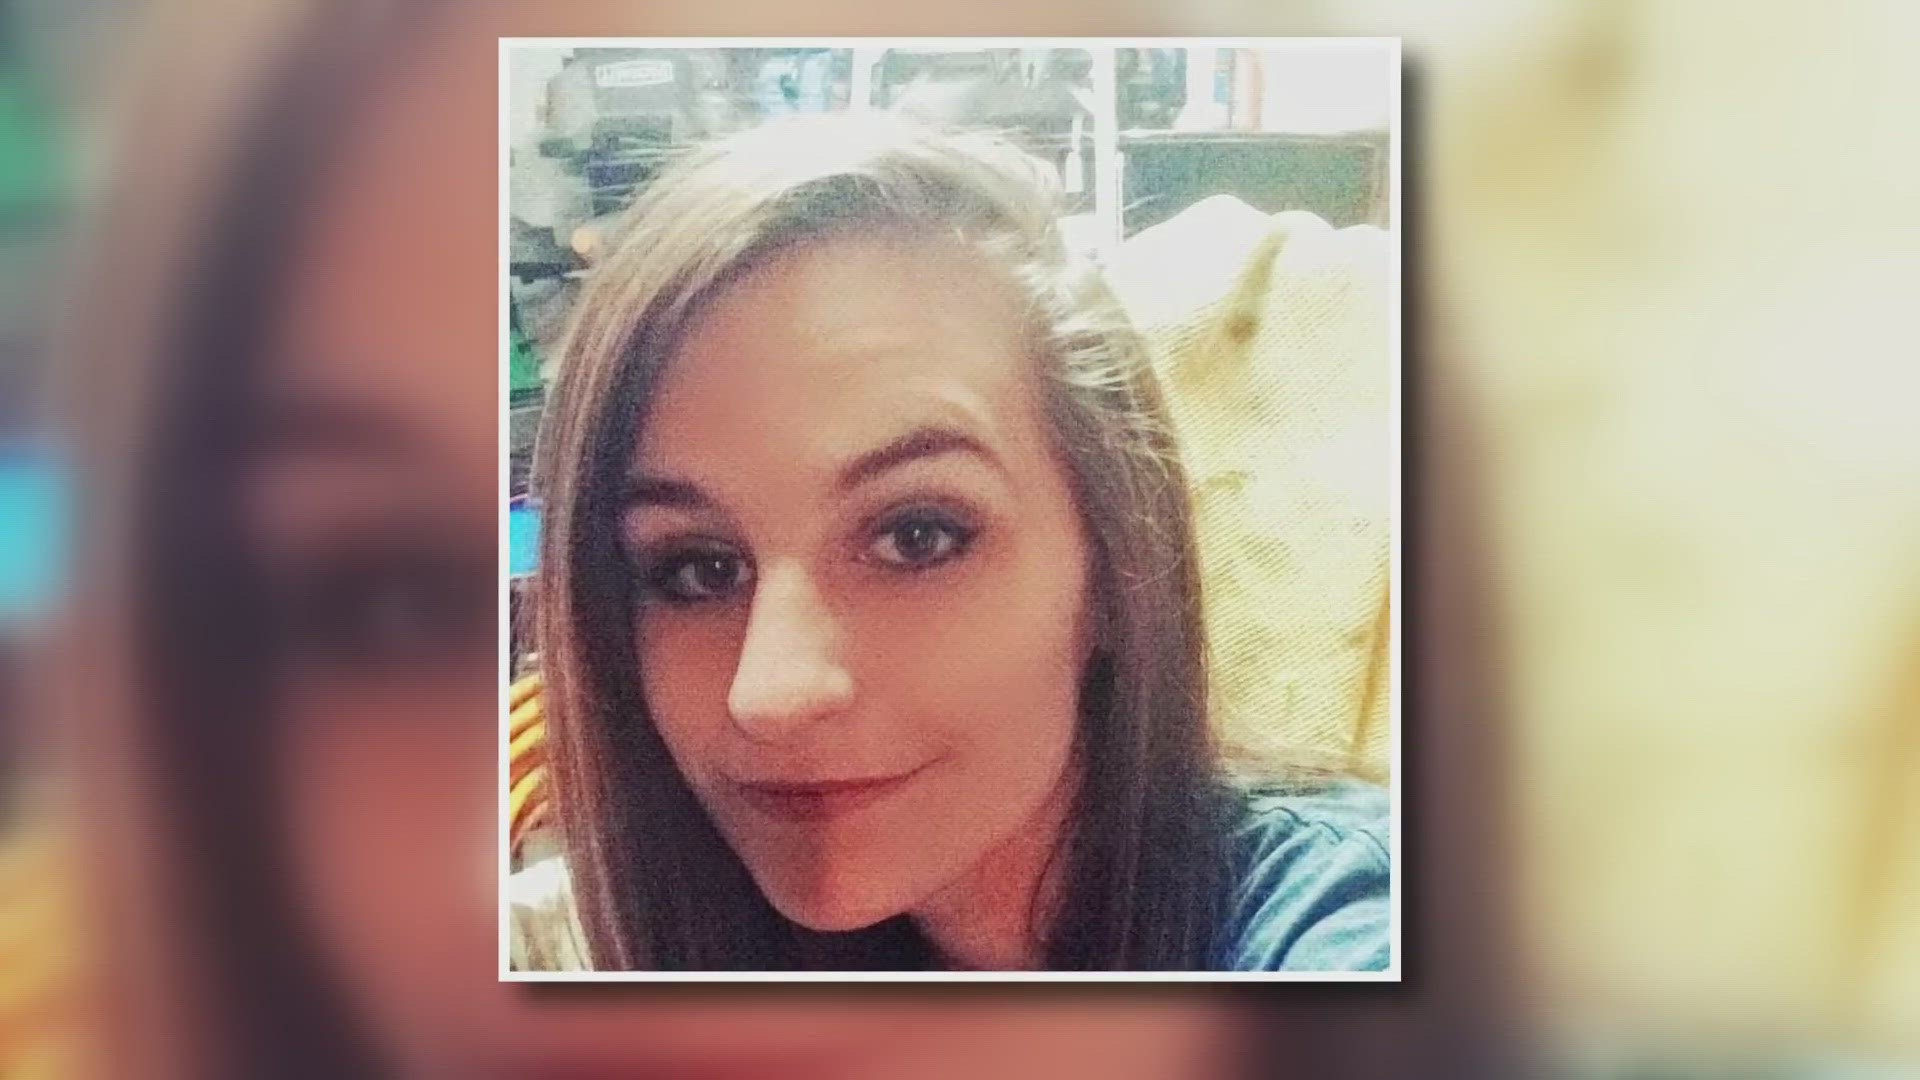 Cheyenne Shropshire's remains were located in a field in Maryville in 2020. Medical examiners ruled her death as a homicide.